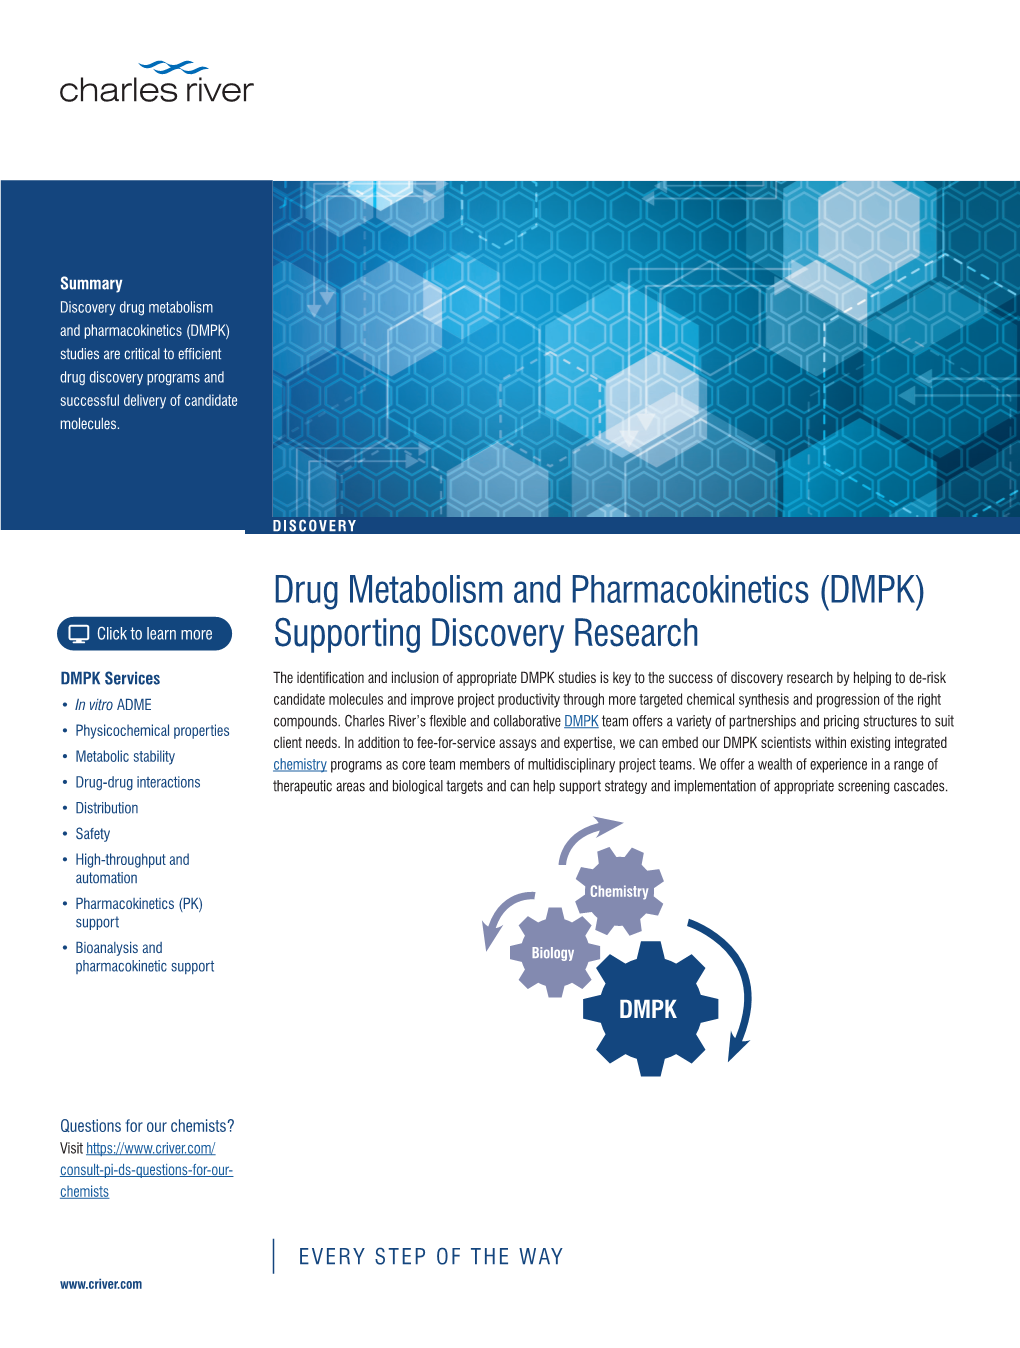 DMPK) Studies Are Critical to Efficient Drug Discovery Programs and Successful Delivery of Candidate Molecules